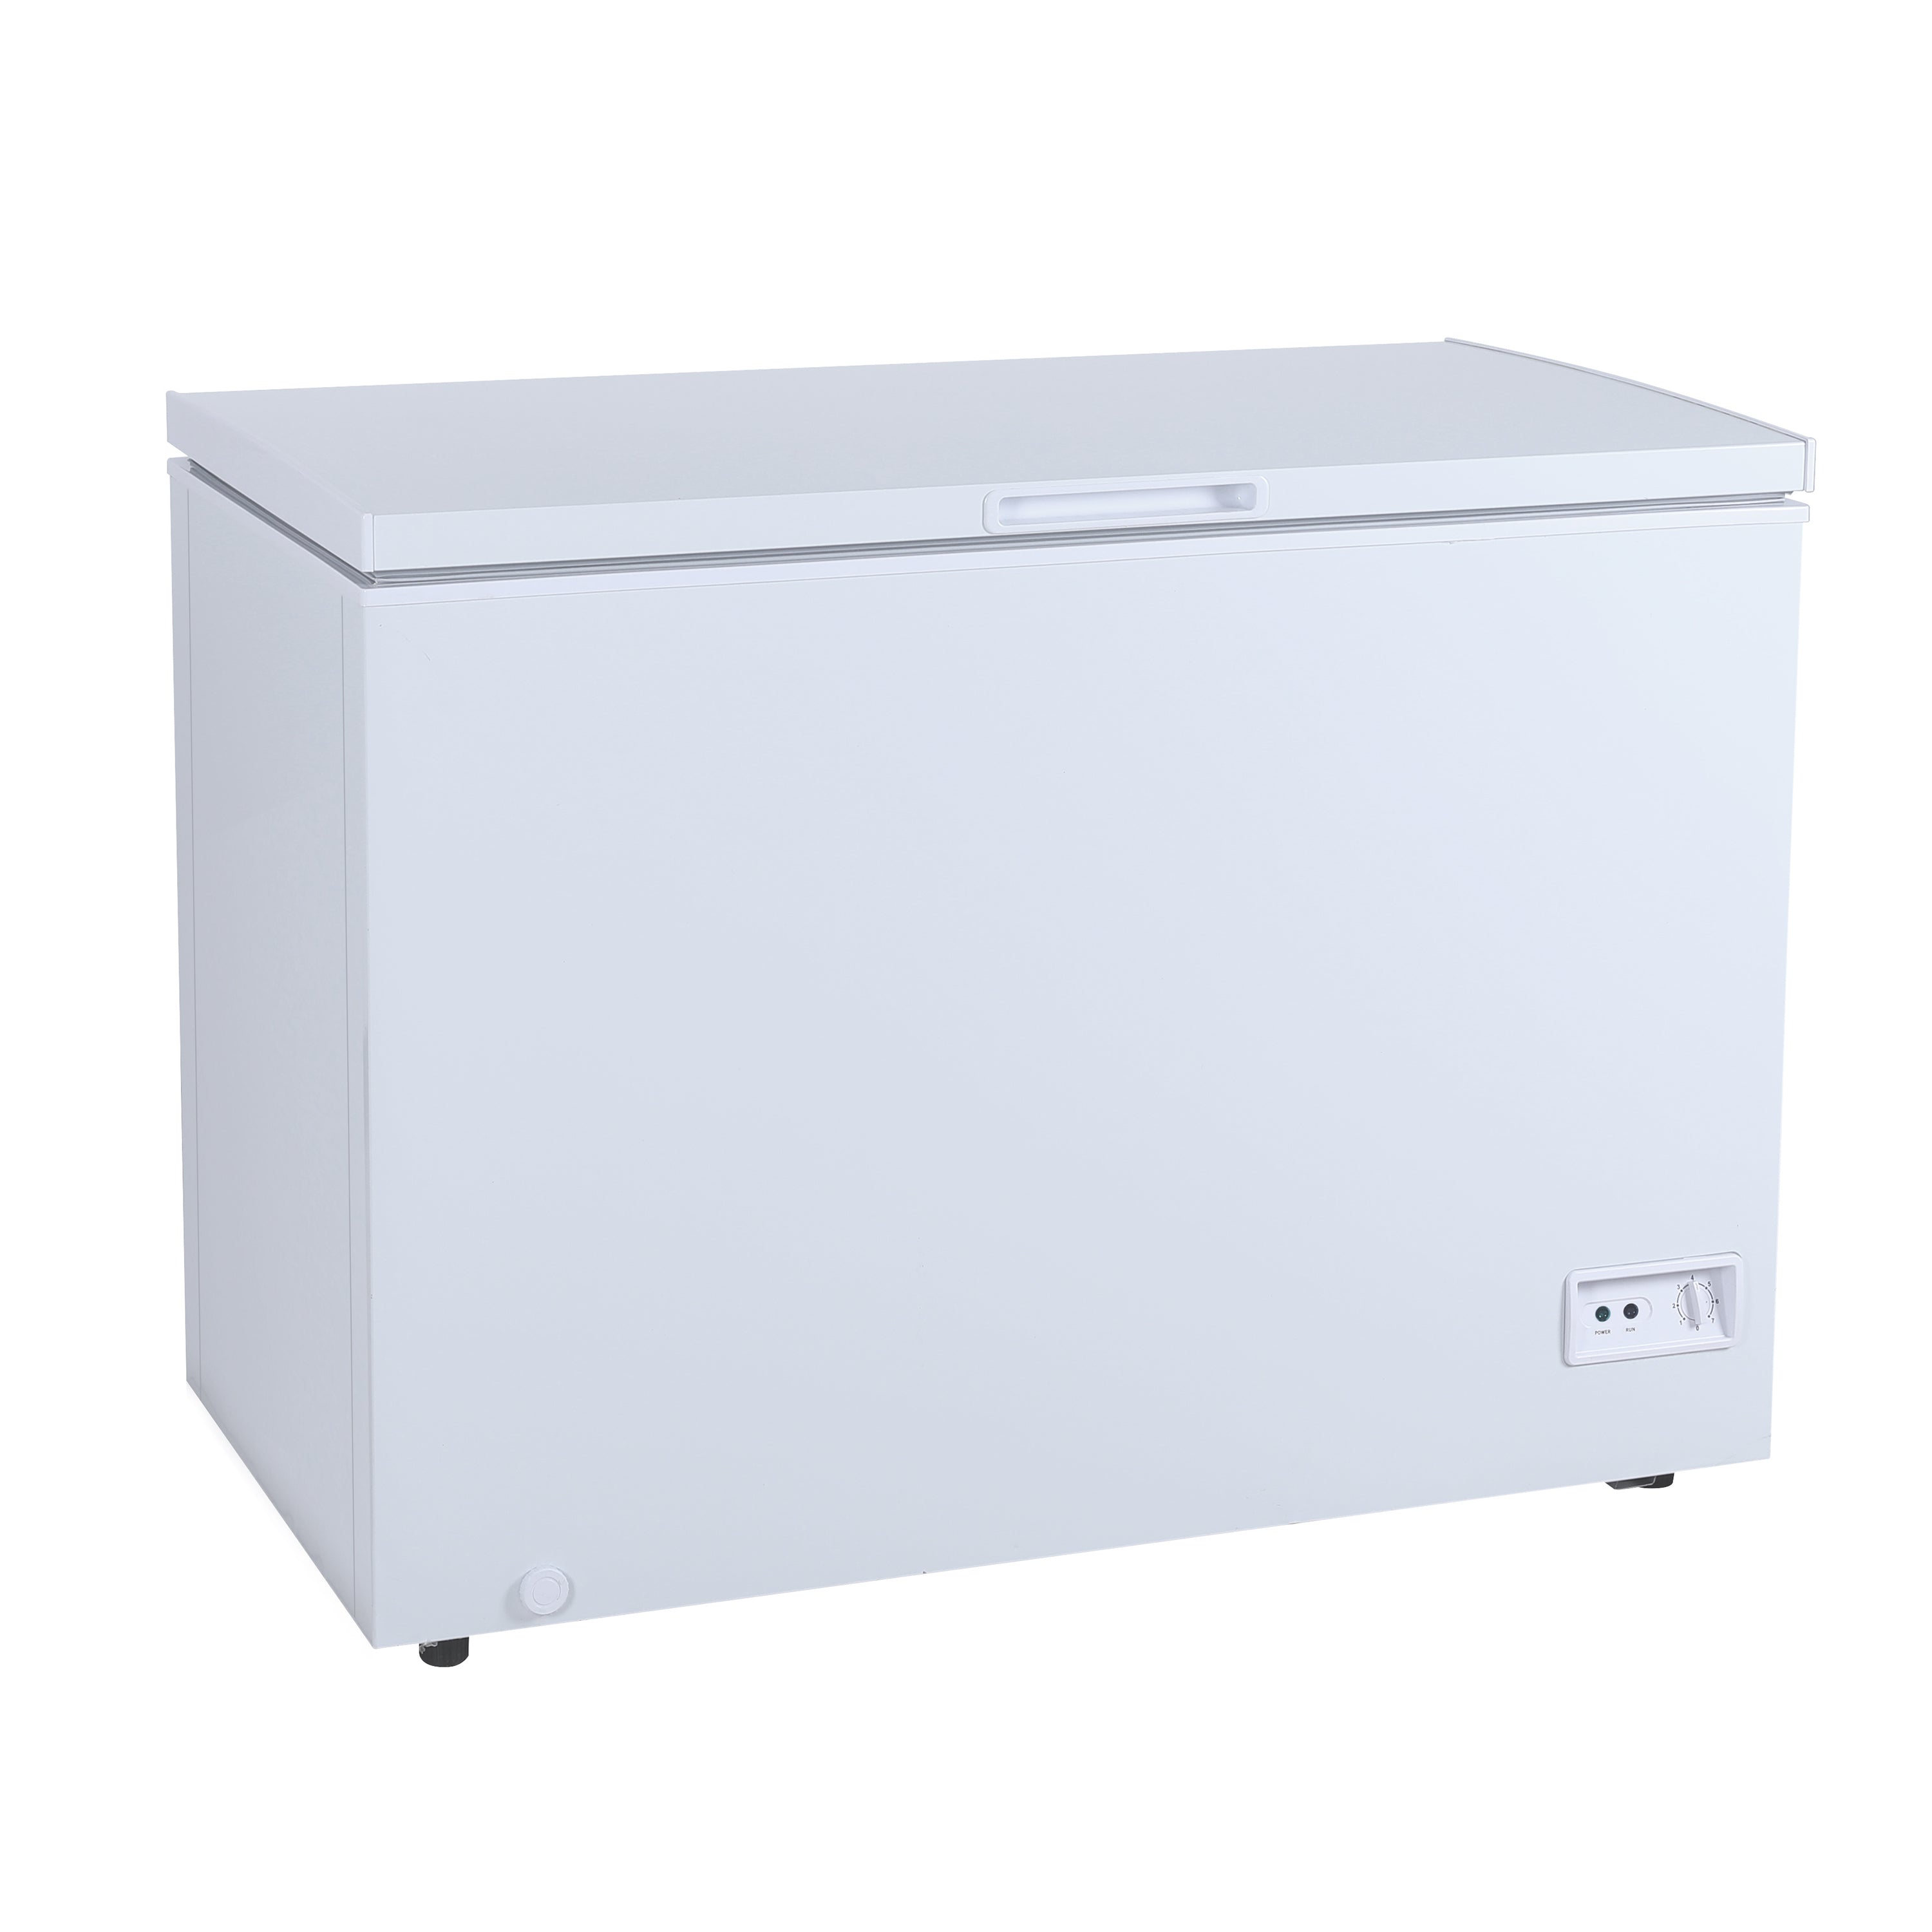 Chest & Upright Freezer Sizes & Dimensions